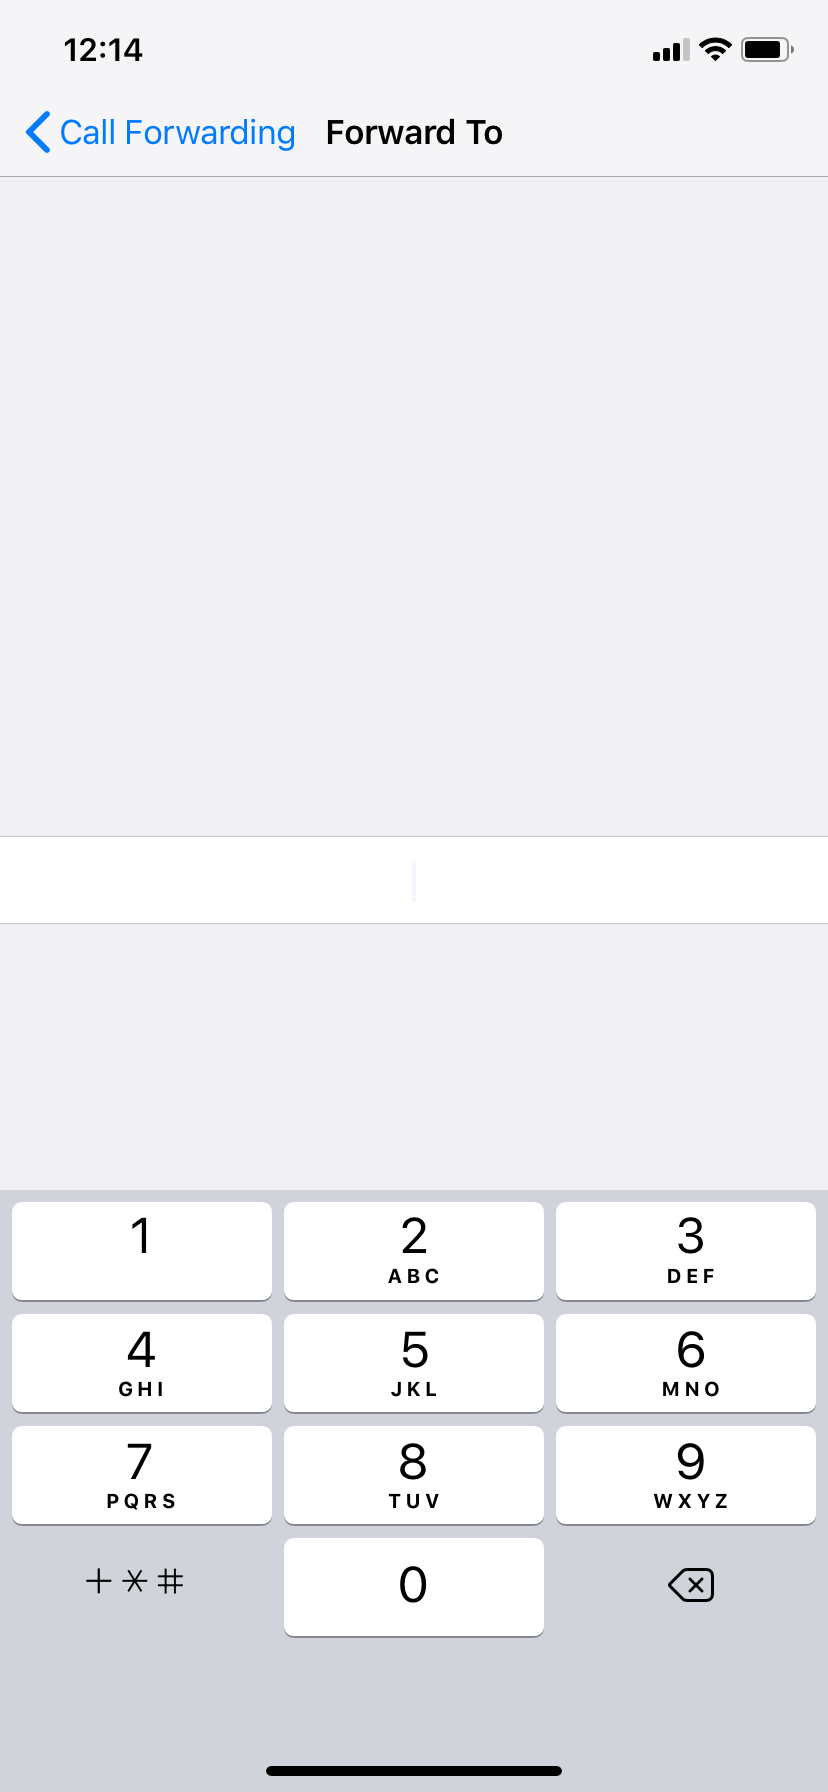 Setting up call forwarding on iPhone